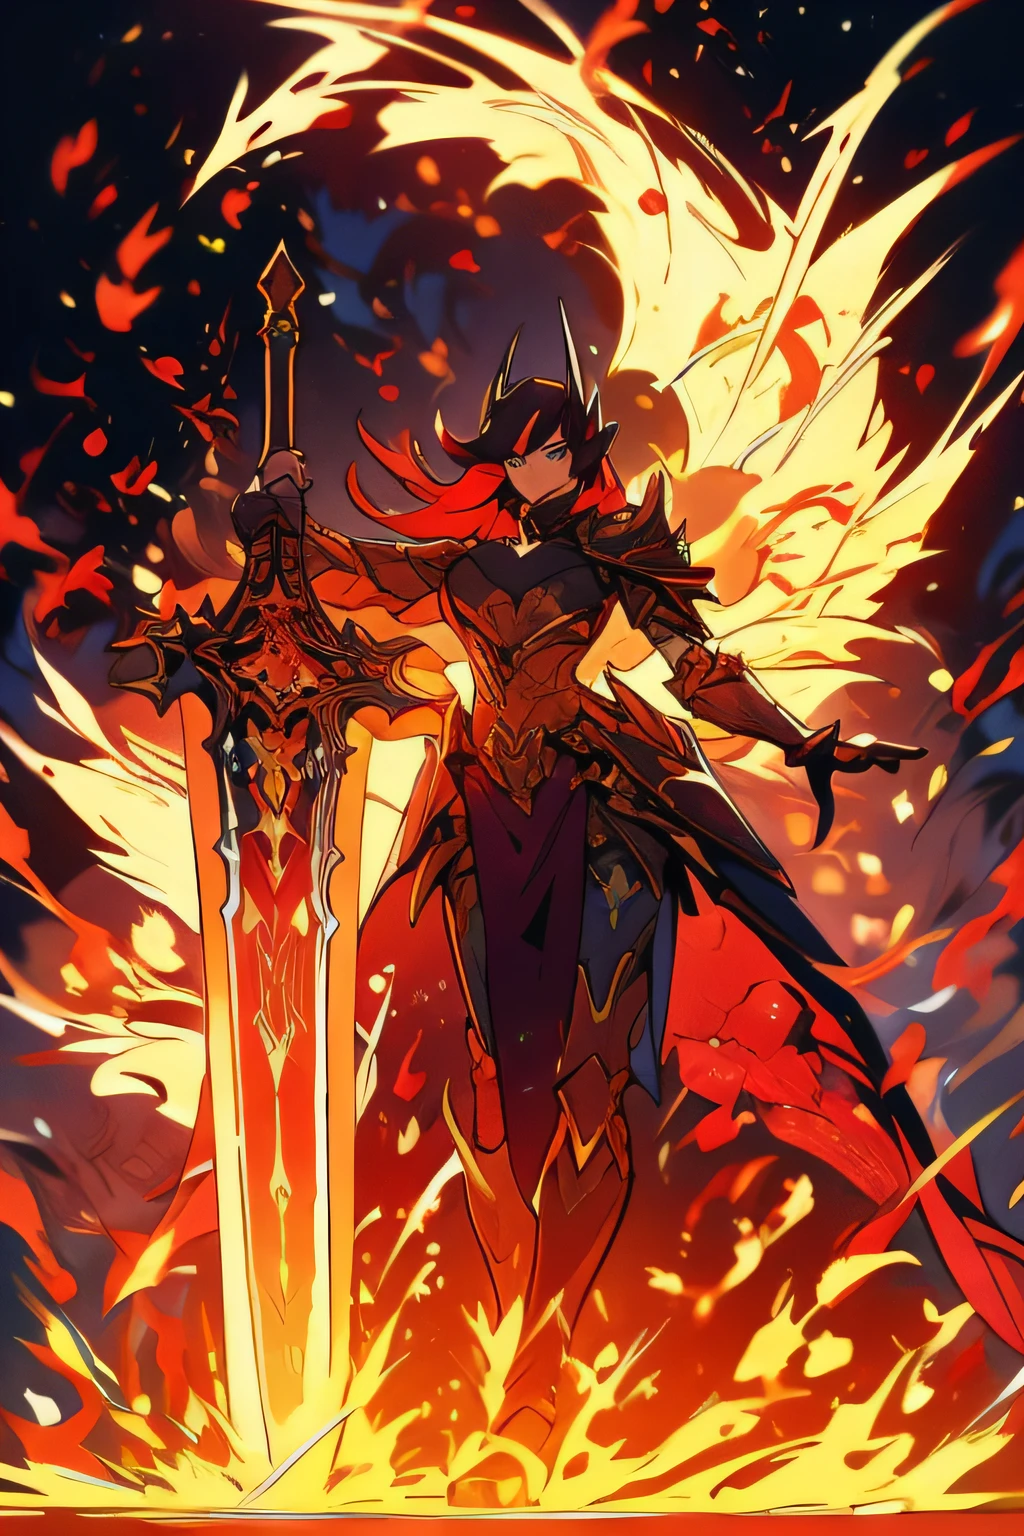 16k, HD, Professional, Highly Detailed, ((Masterpiece: 0.3)), (((High Quality))), Ultra-detailed face, Highly Detailed Lips, Detailed Eyes, full body, 1 Dark elf, female, paladin, red hair, wearing armor, wielding large sword, smiling, happy, flaming wings